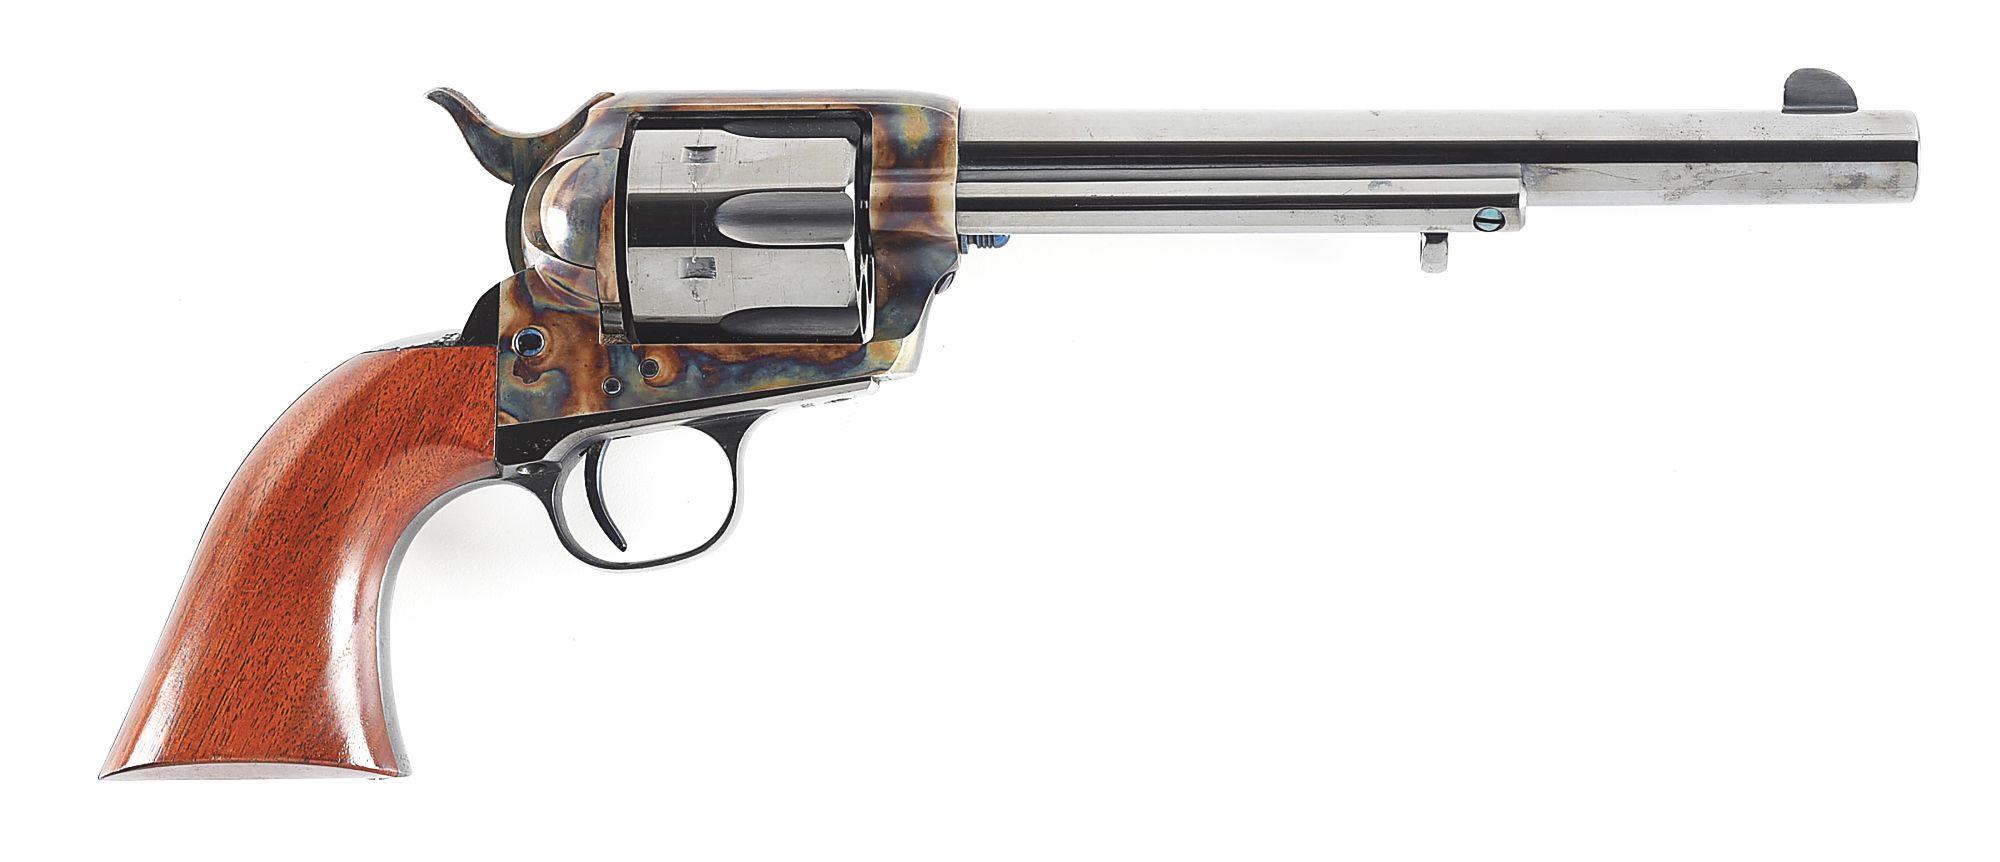 (A) TURNBULL RESTORED COLT FRONTIER SIX SHOOTER SINGLE ACTION REVOLVER.